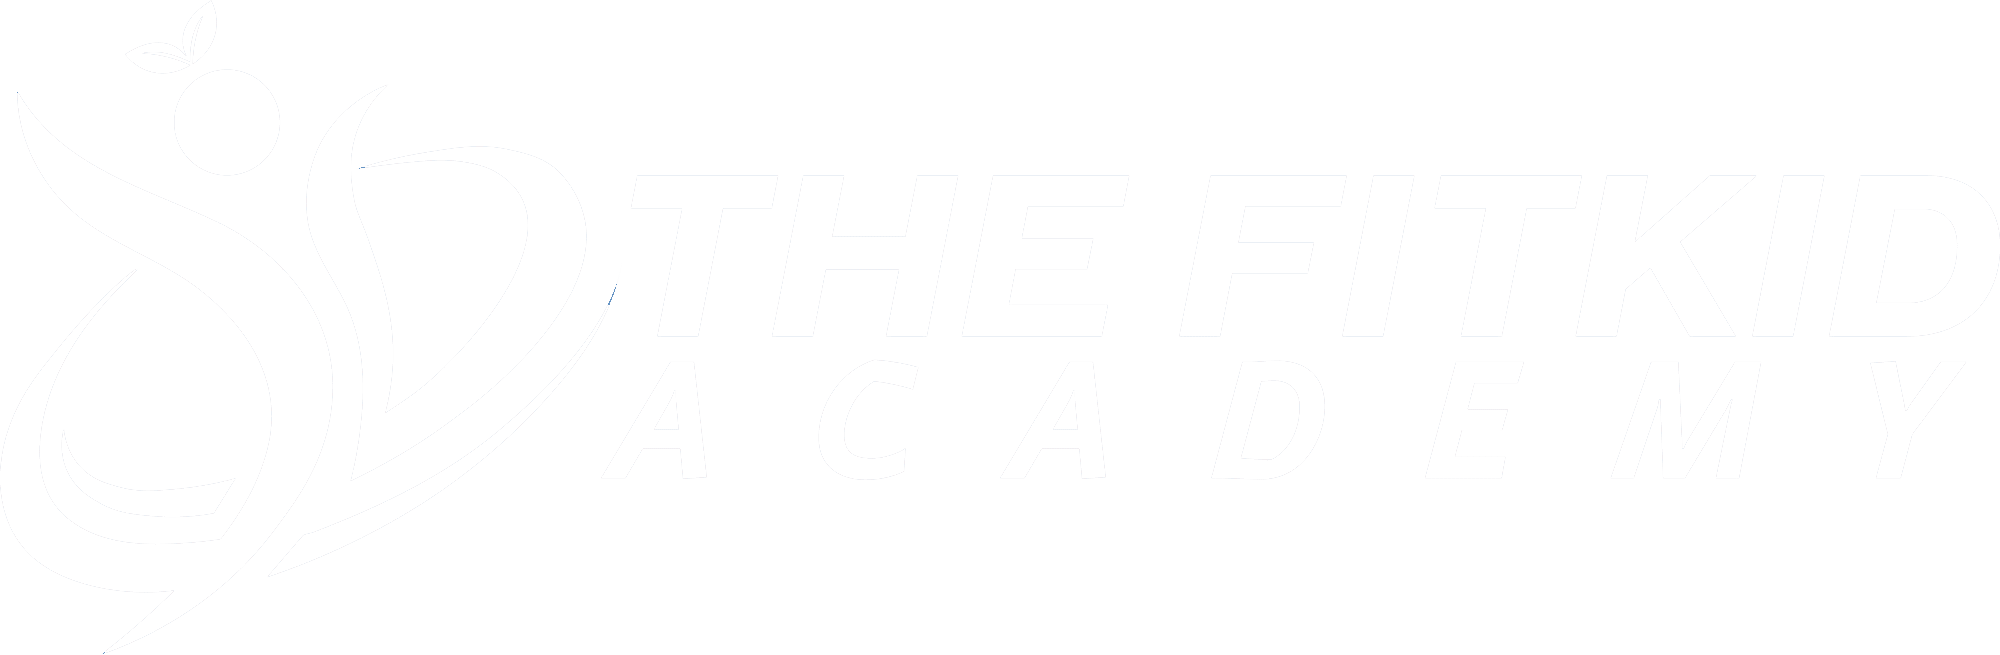 The FitKid Academy